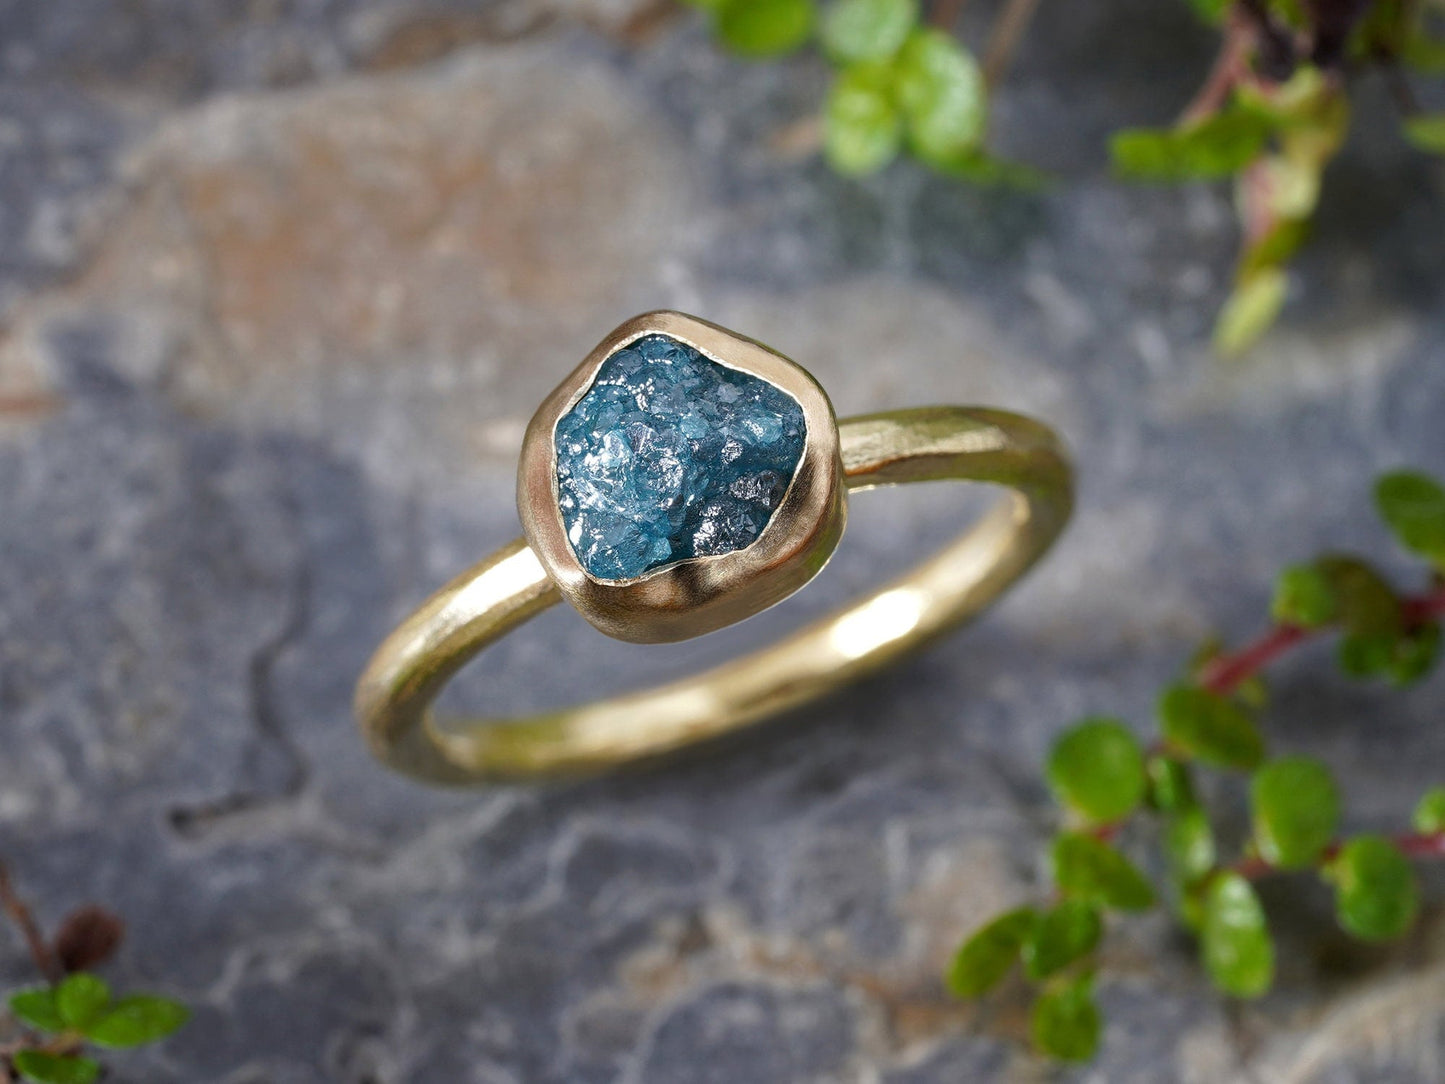 Blue Diamond Engagement Ring in 18ct Yellow Gold, 1.30ct Diamond Ring, 1.30ct Rustic Diamond Ring